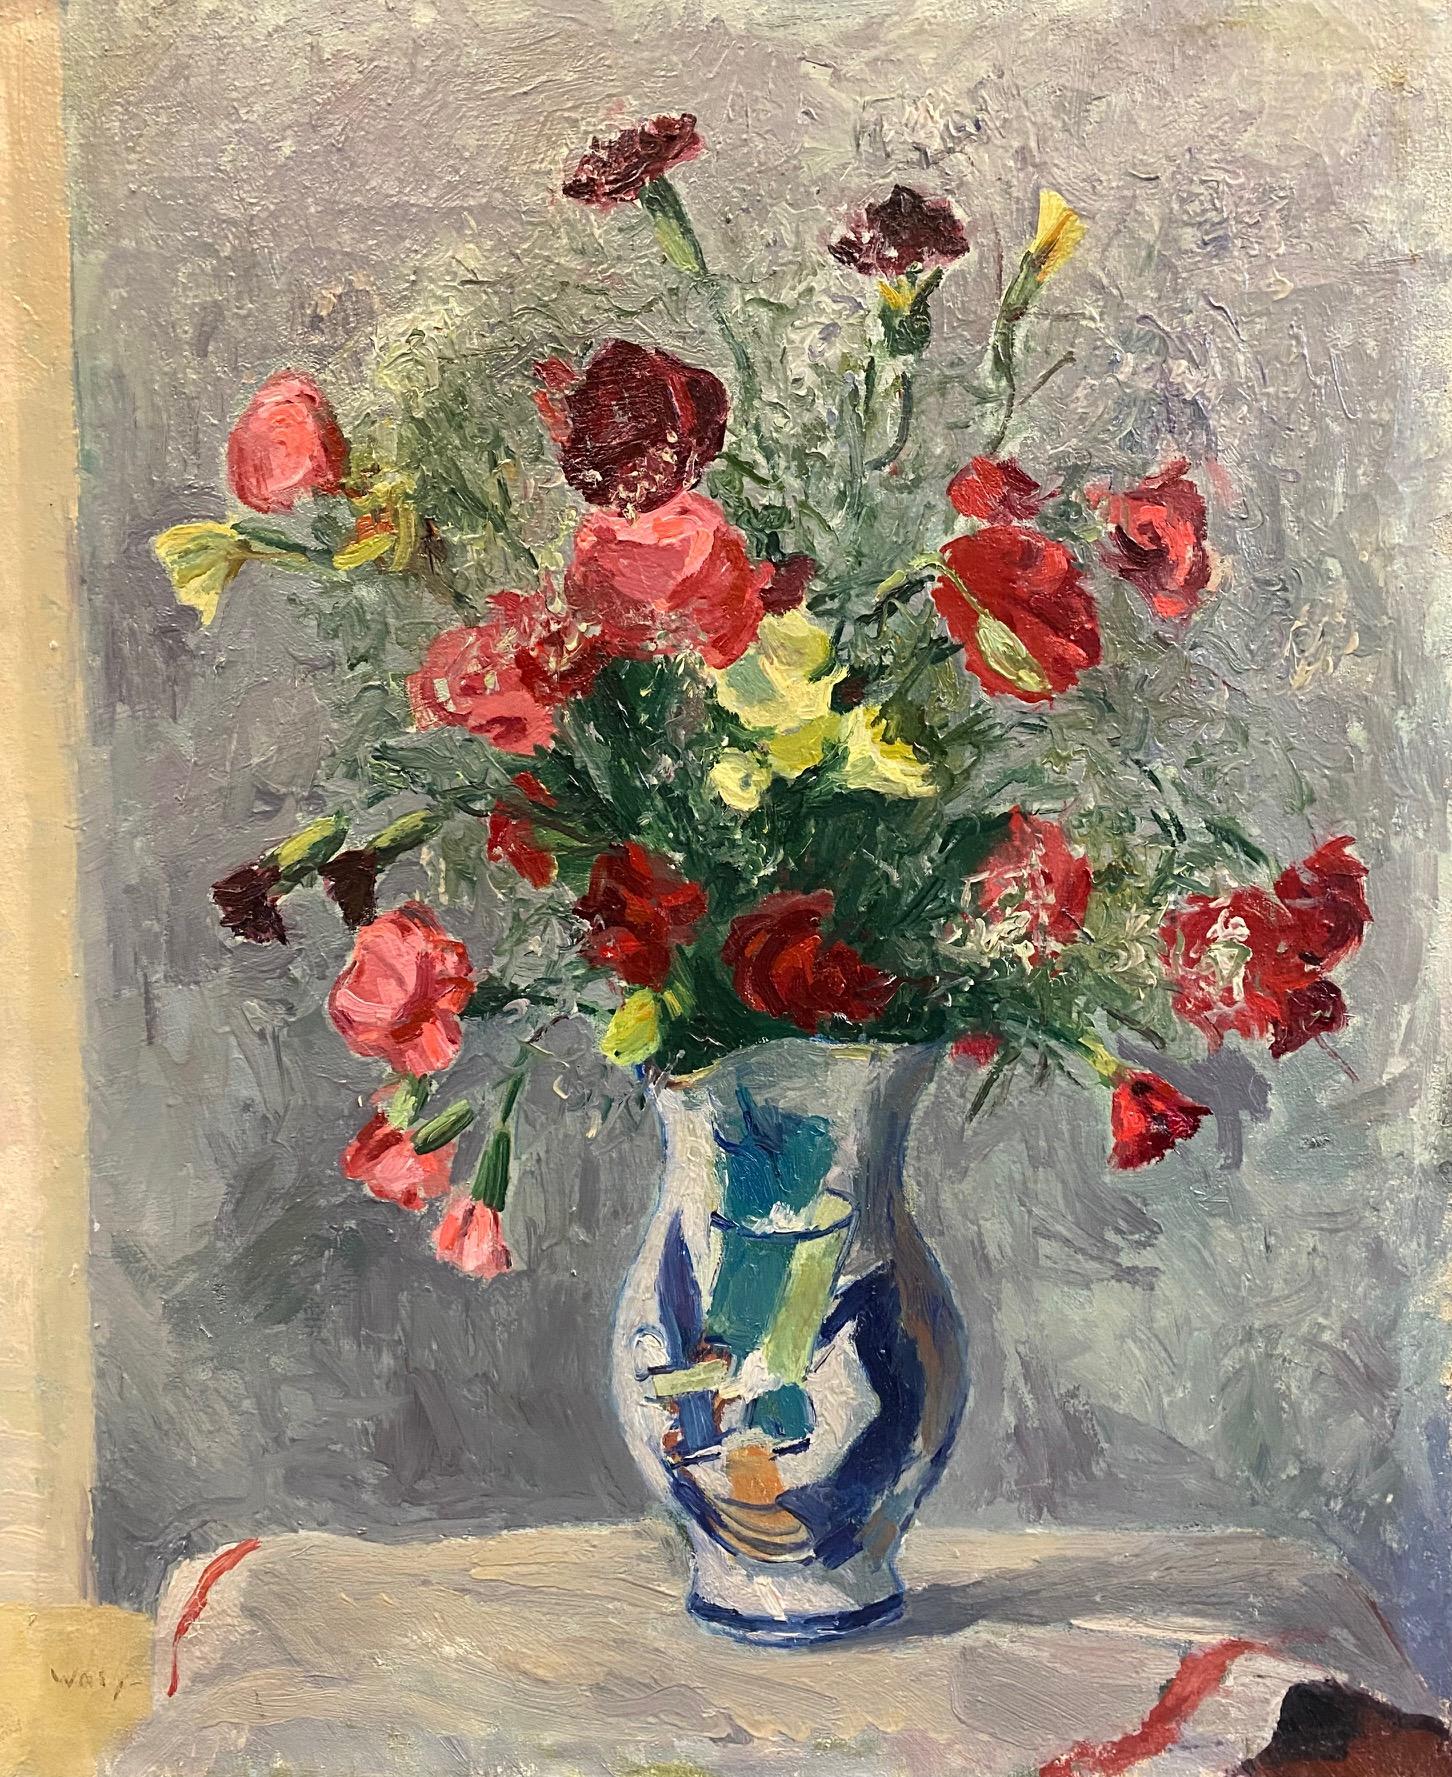 Bouquet of flowers by WALY - Oil on canvas 53x44 cm